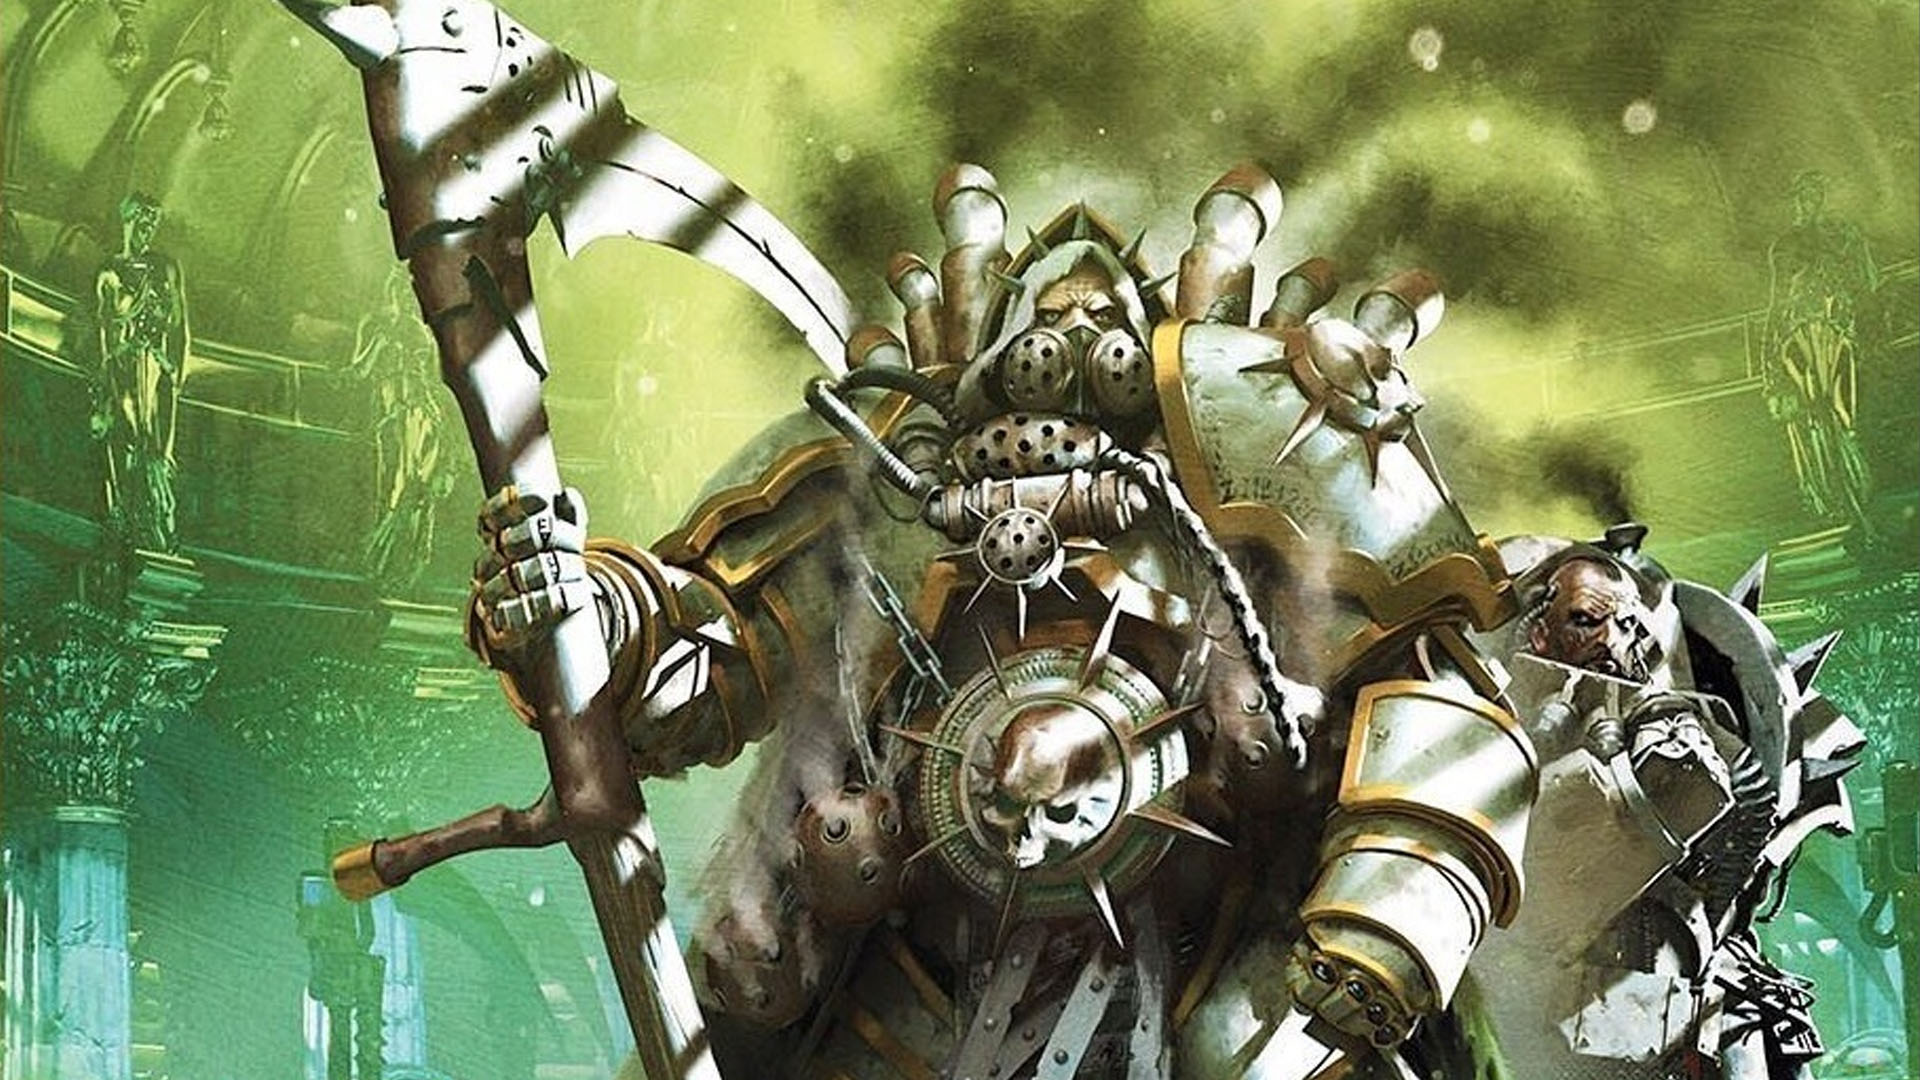 Warhammer 40k Mortarion Primarch guide - Games Workshop artwork from the cover of Black Library novel Buried Dagger, showing Mortarion and Callas Typhon